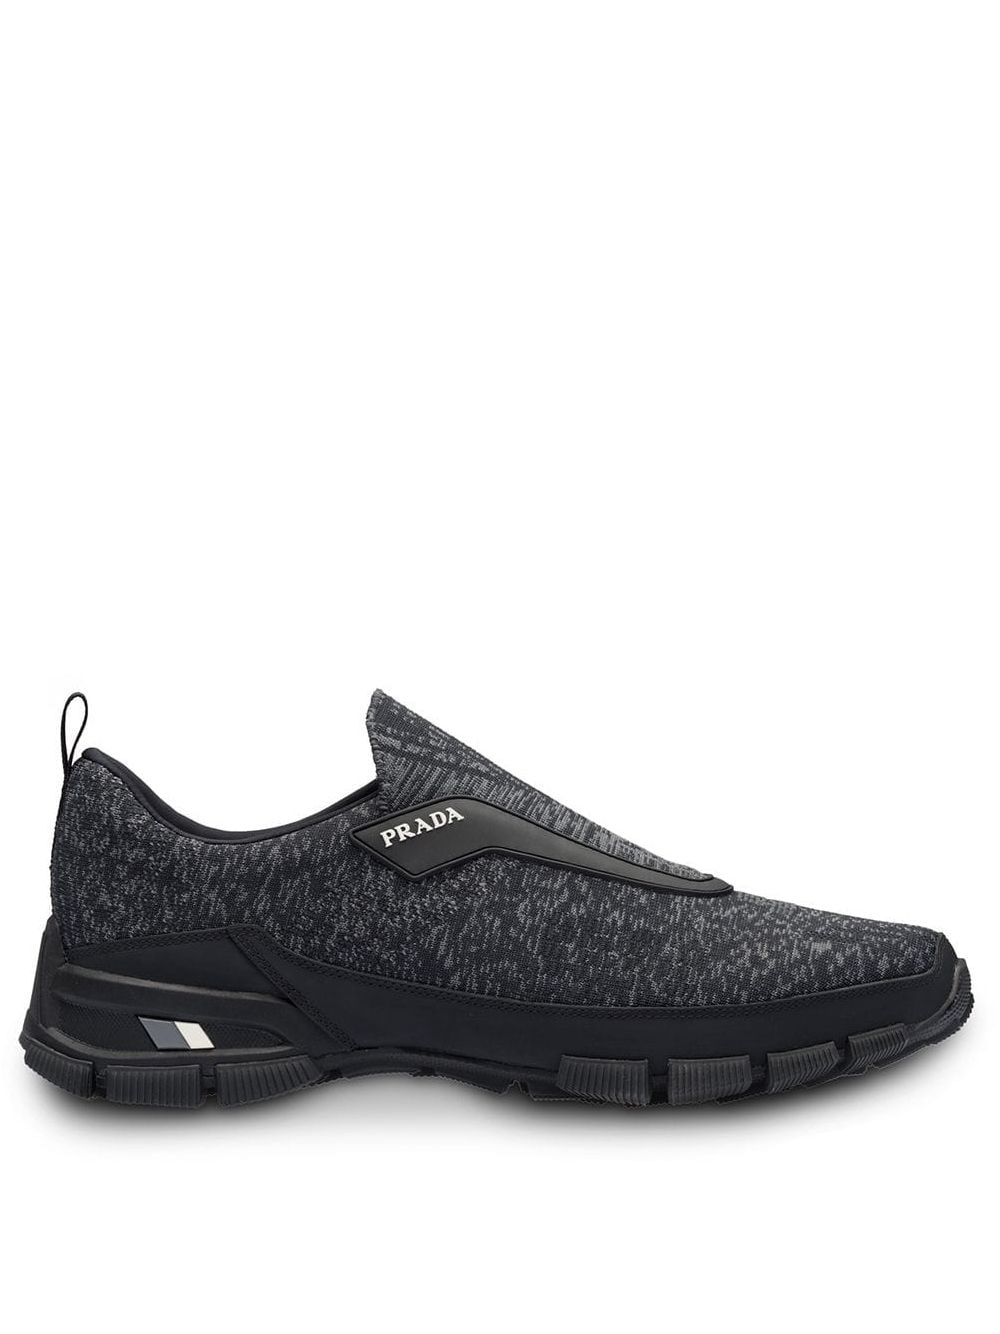 PRADA CROSSECTION KNIT trainers